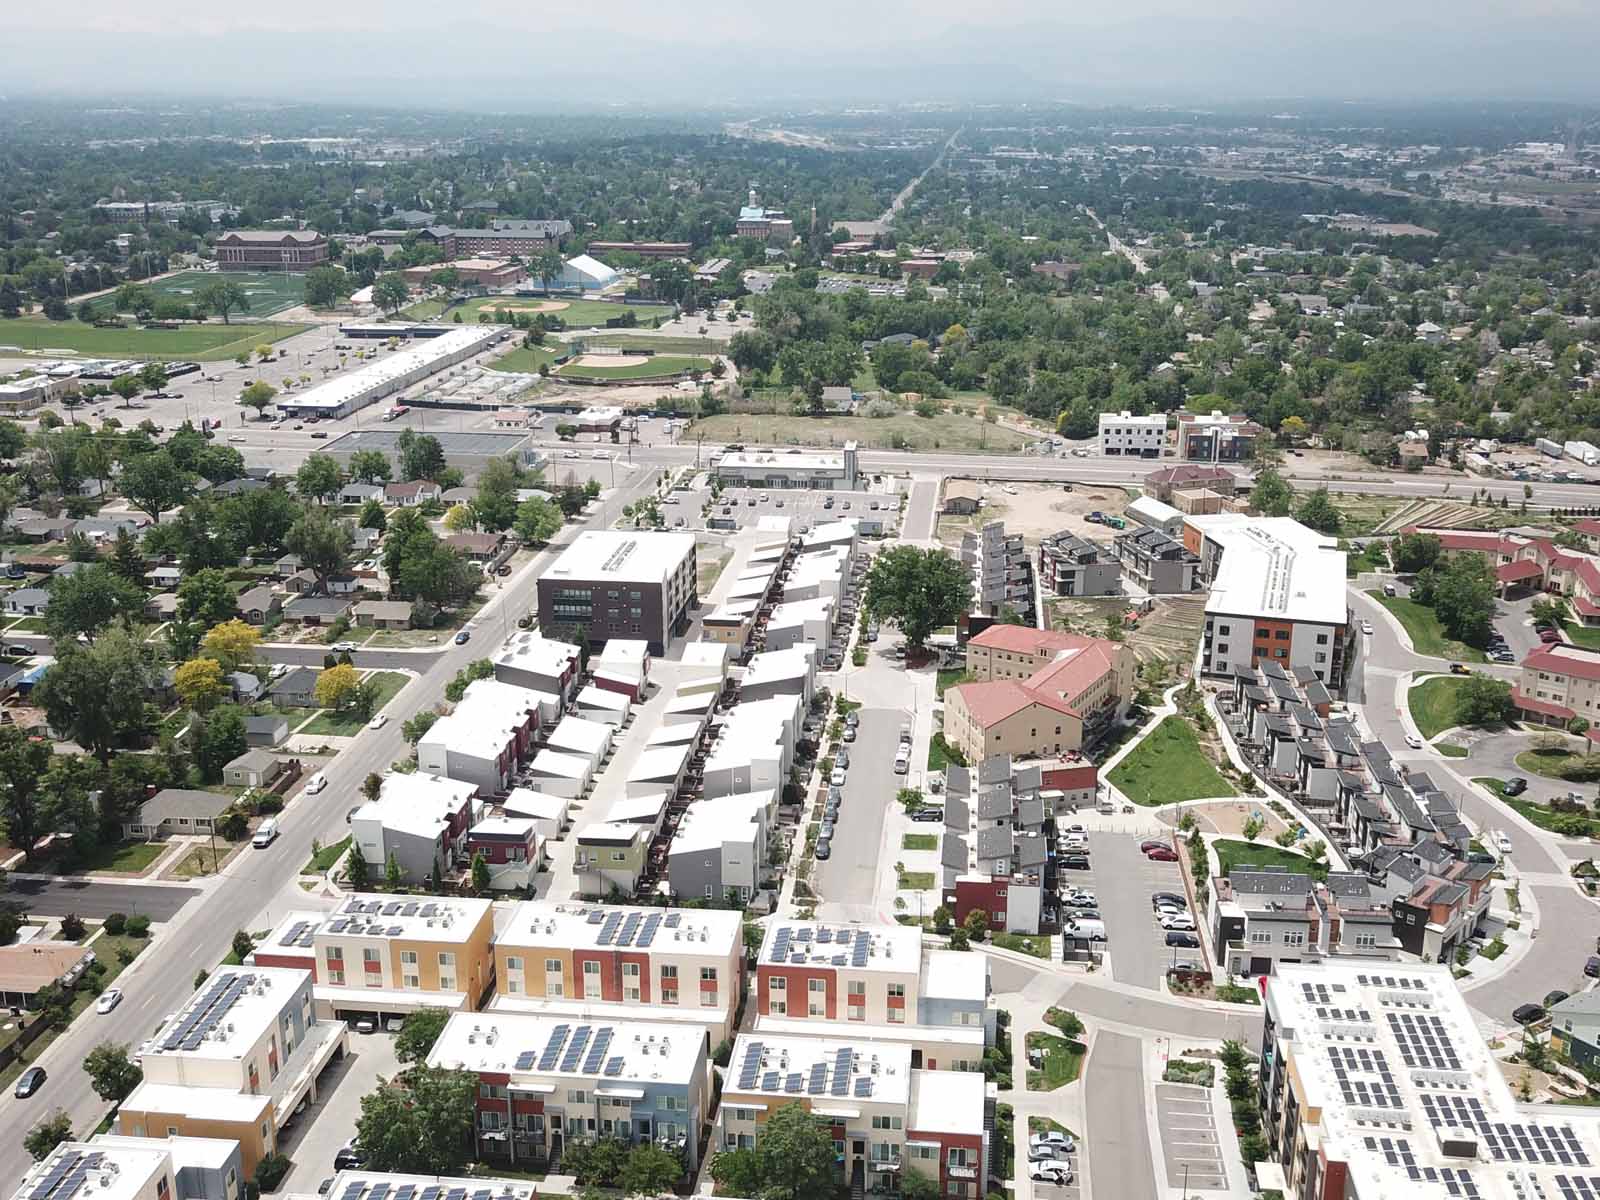 Aria Denver, Zen Condos, Luxury Denver Colorado Townhomes Drone View - Weins Development Group - Award-winning real estate developers in Denver, Colorado. Top #1 of Builders producing high-quality townhomes, condos, apartments, retail, & office projects